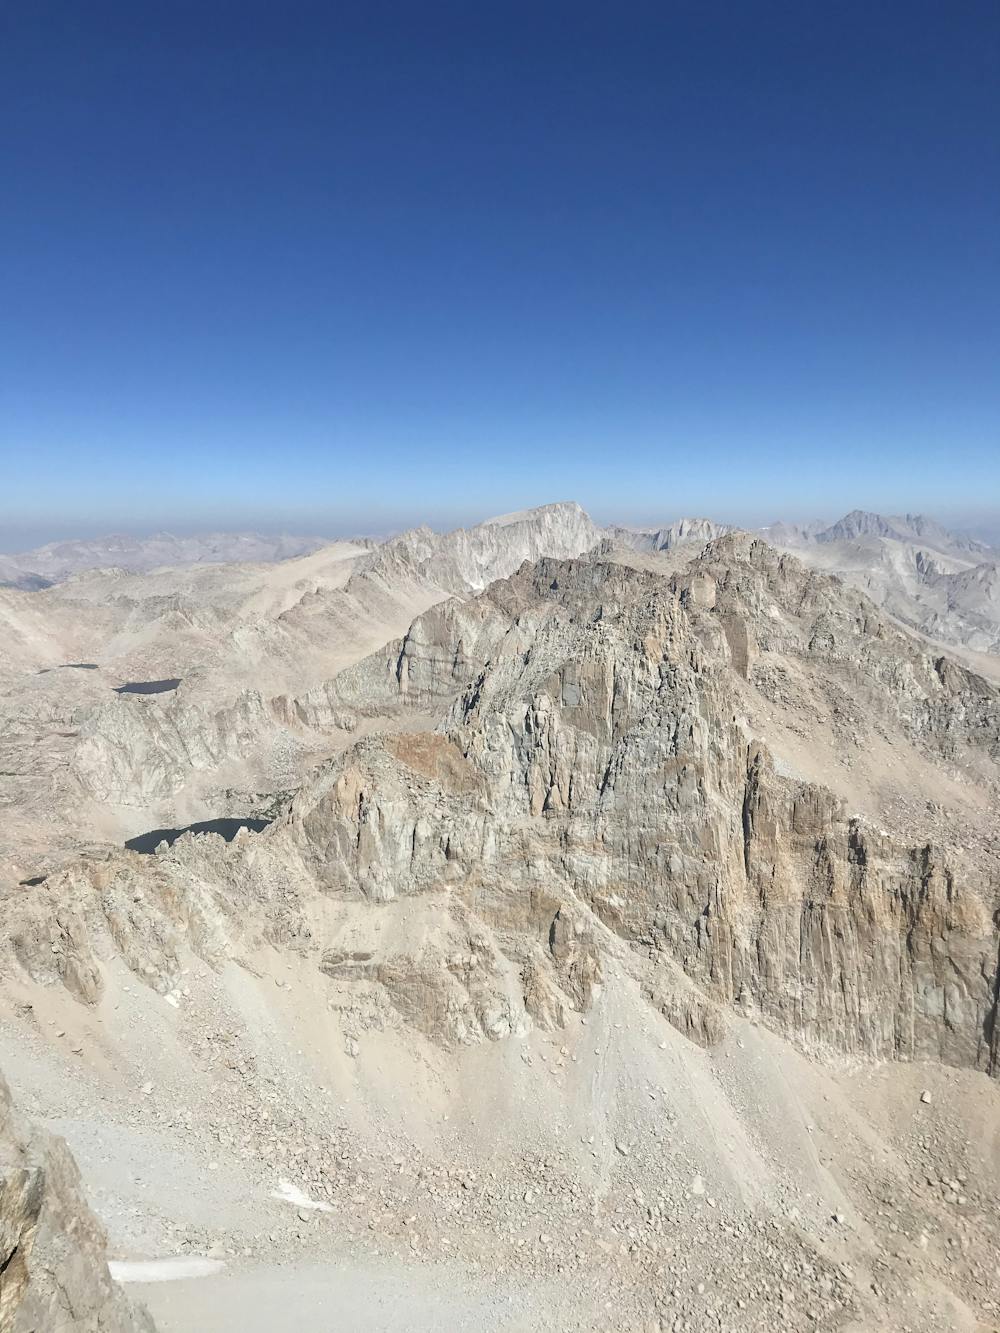 Mount Whitney range seen from the summit of Mount Langley